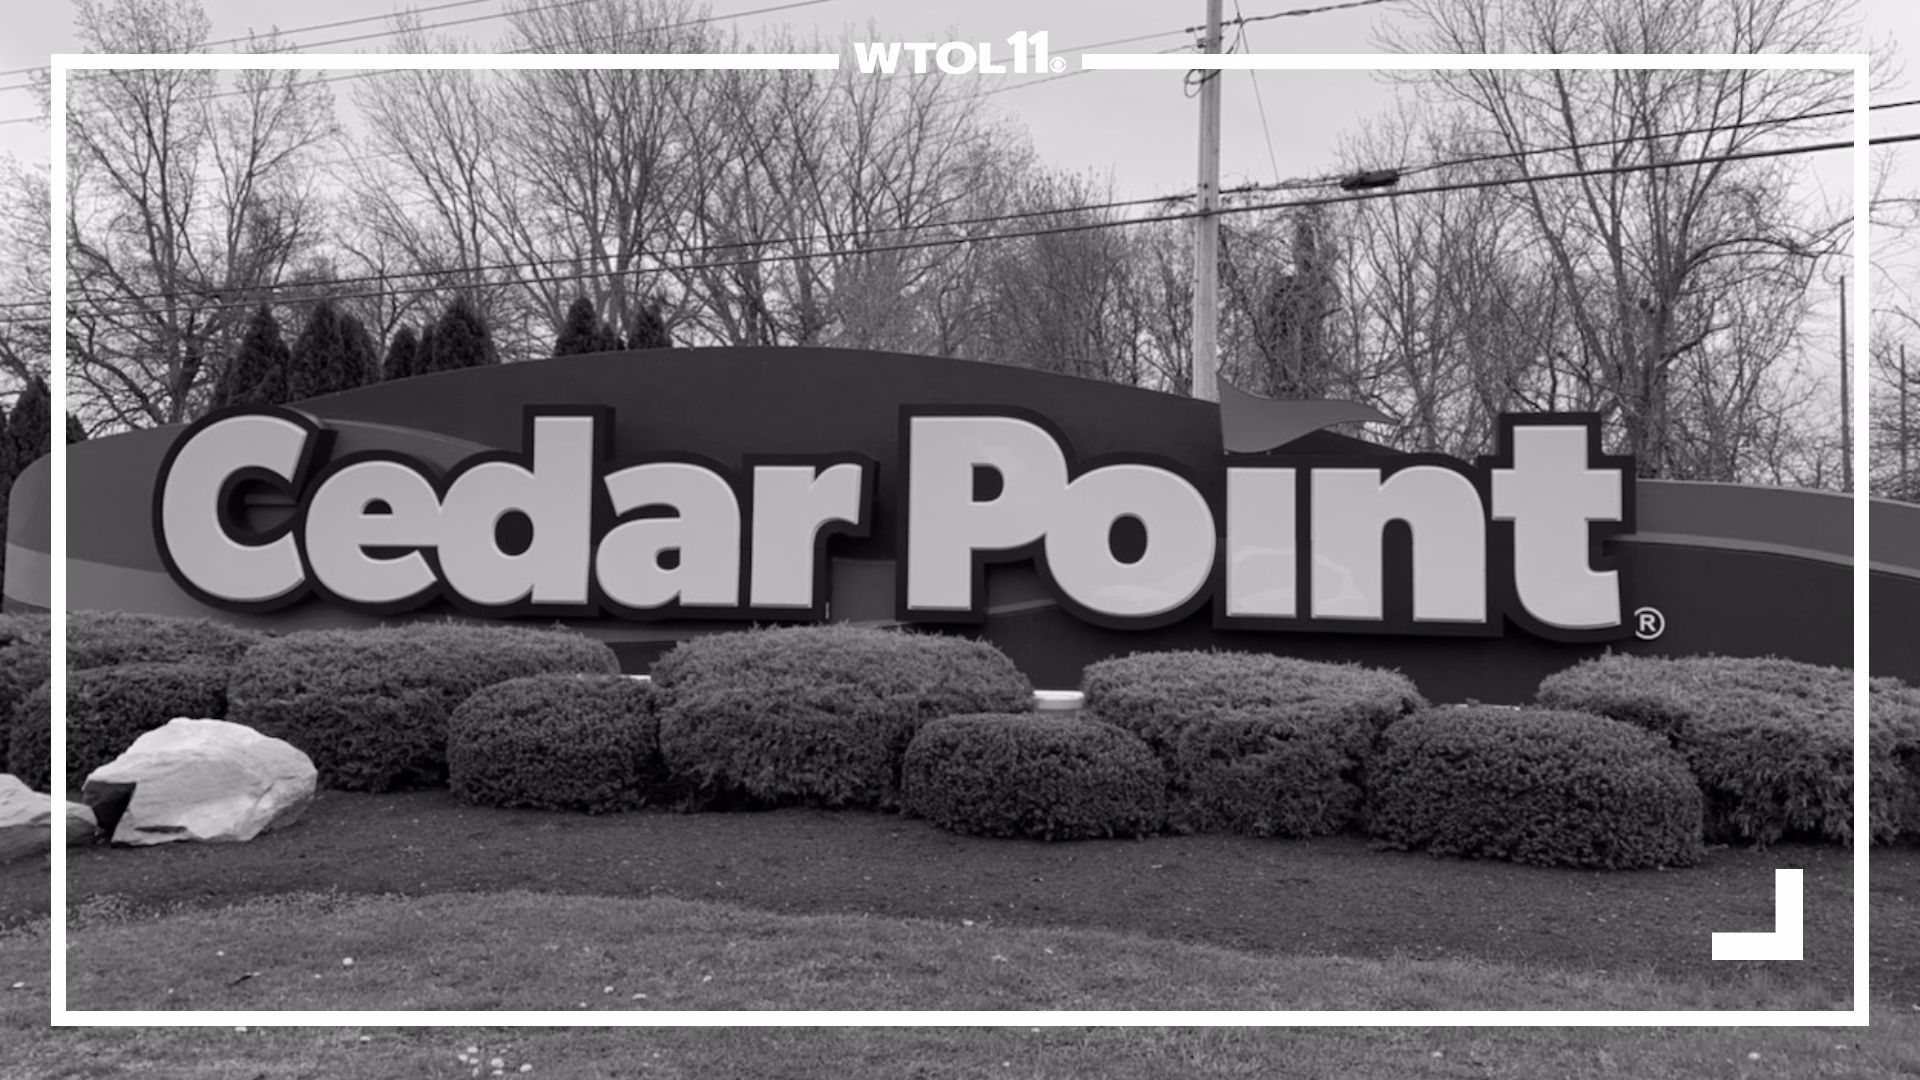 11 Investigates brought you the story of 28 sexual assault reports at the Cedar Point employee housing in the last five years.